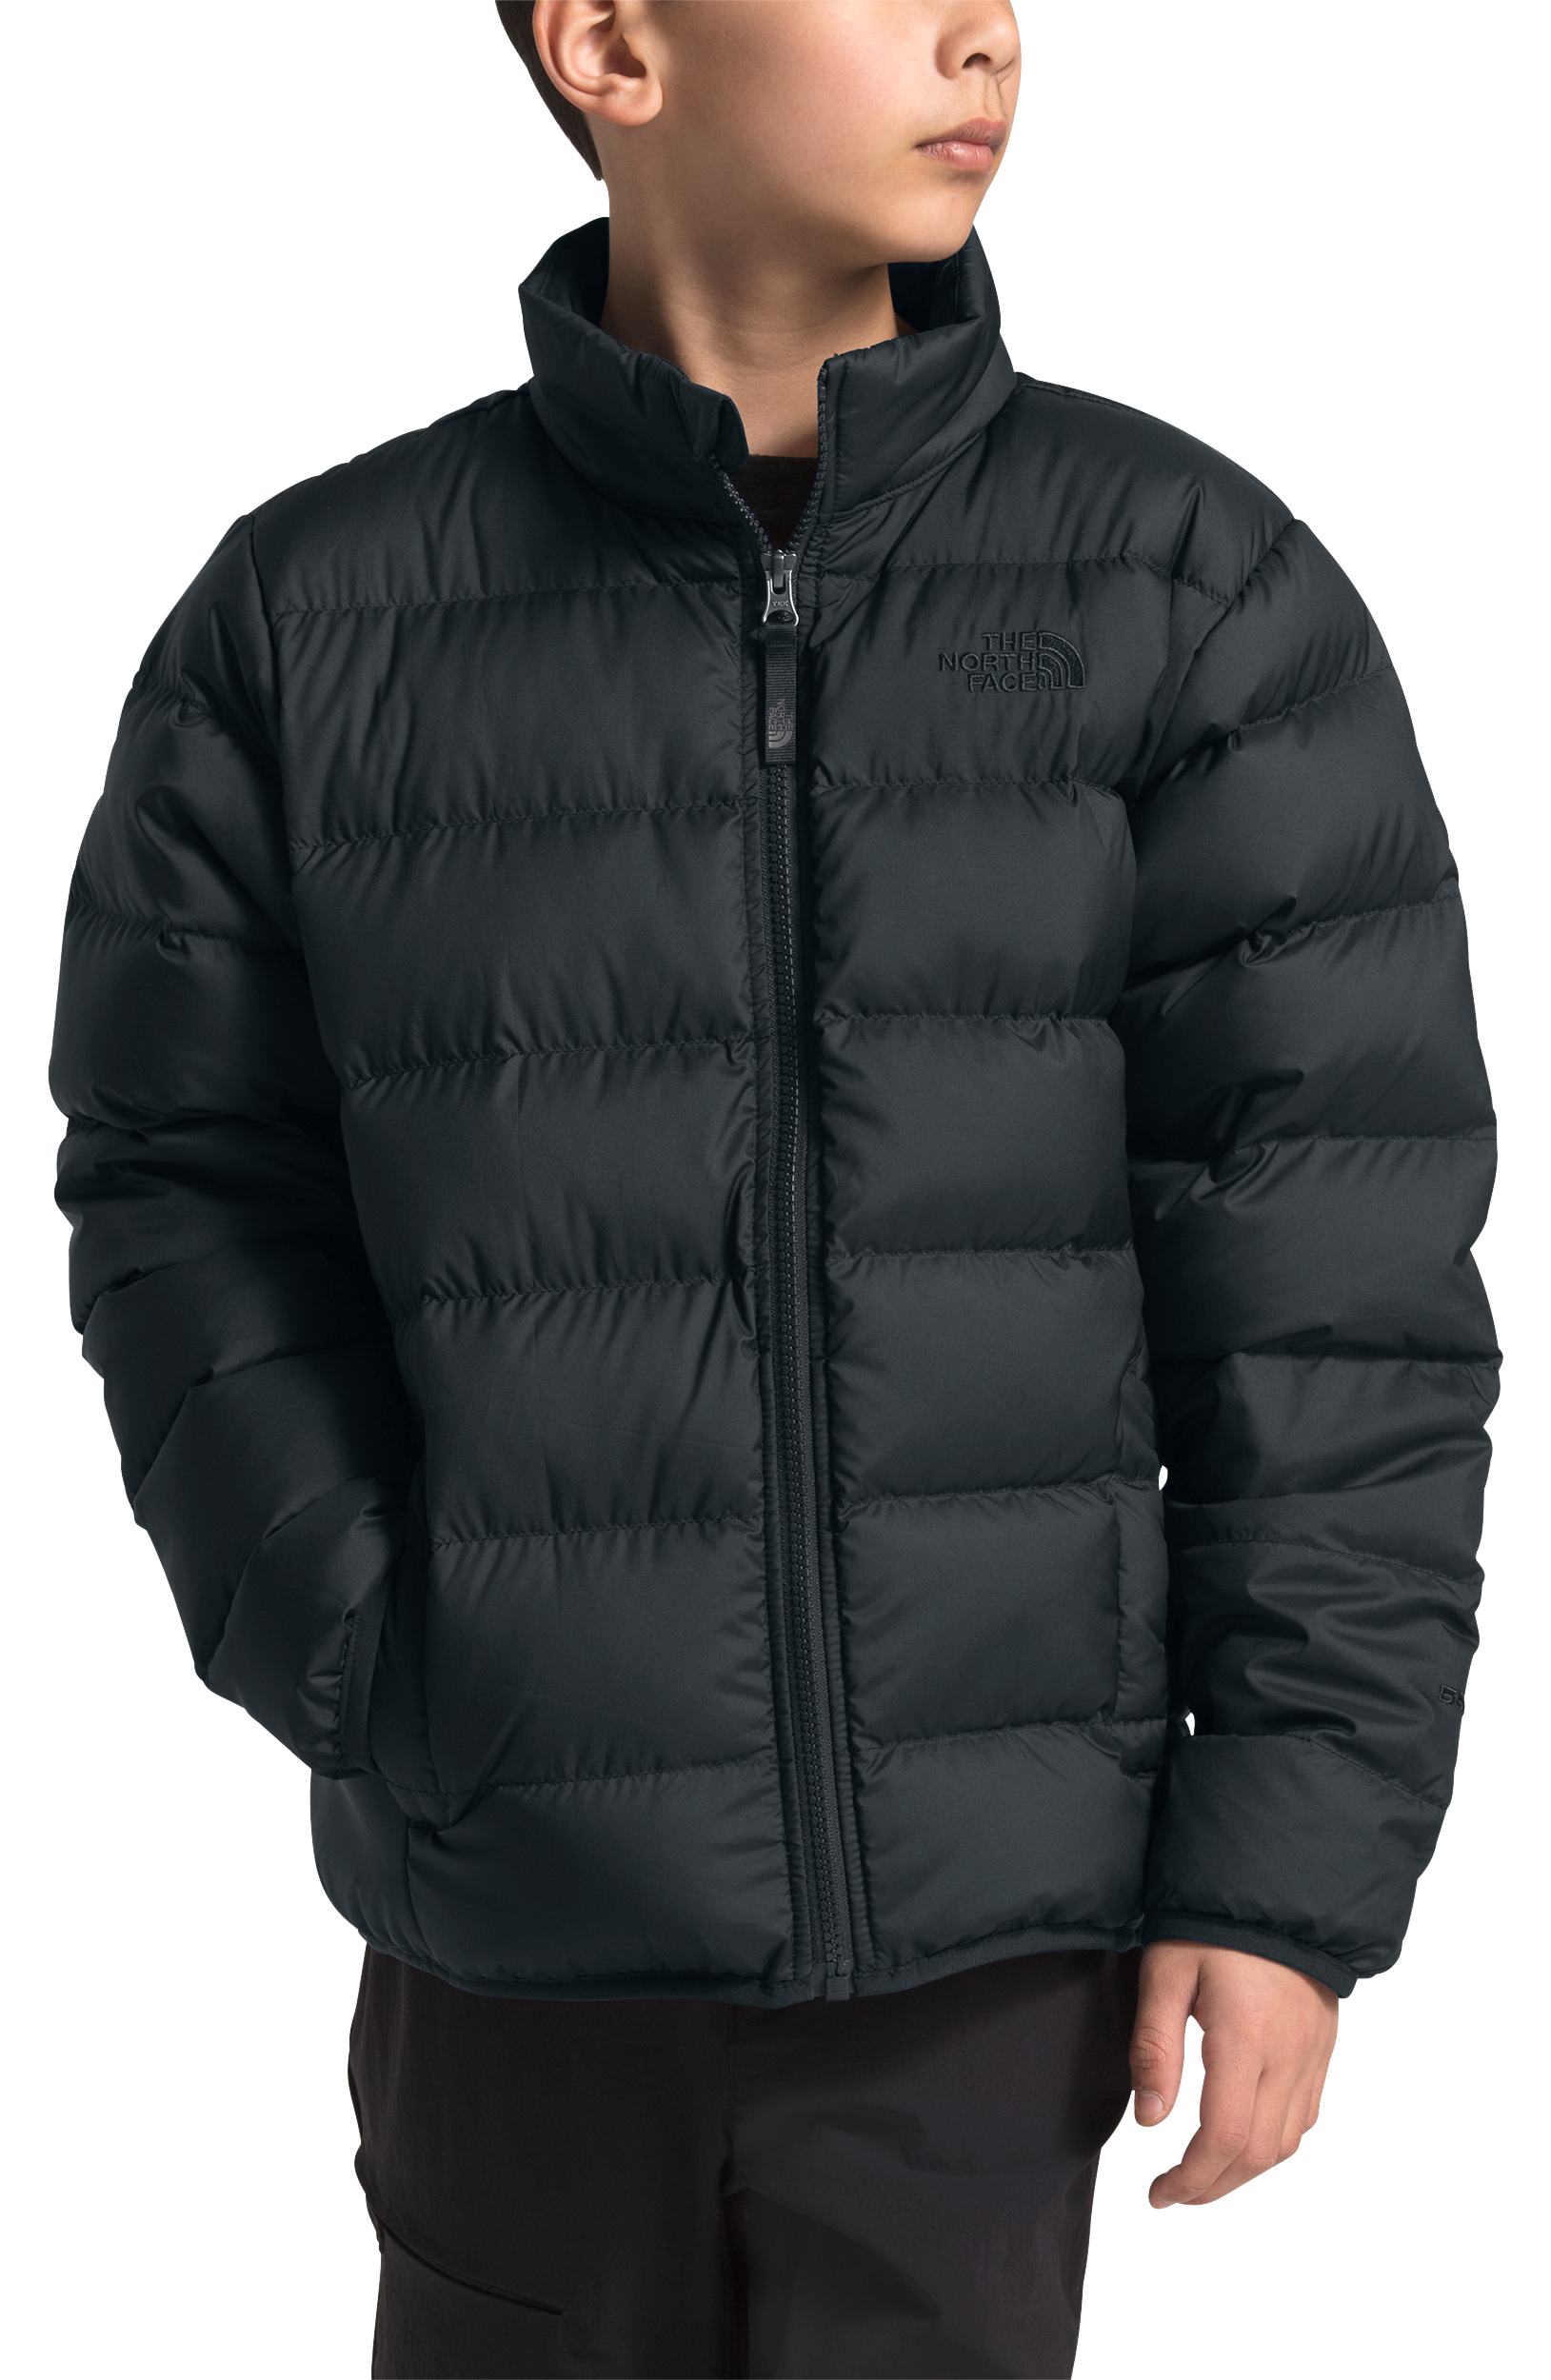 The North Face Andes Down Jacket for Boys | Bass Pro Shops